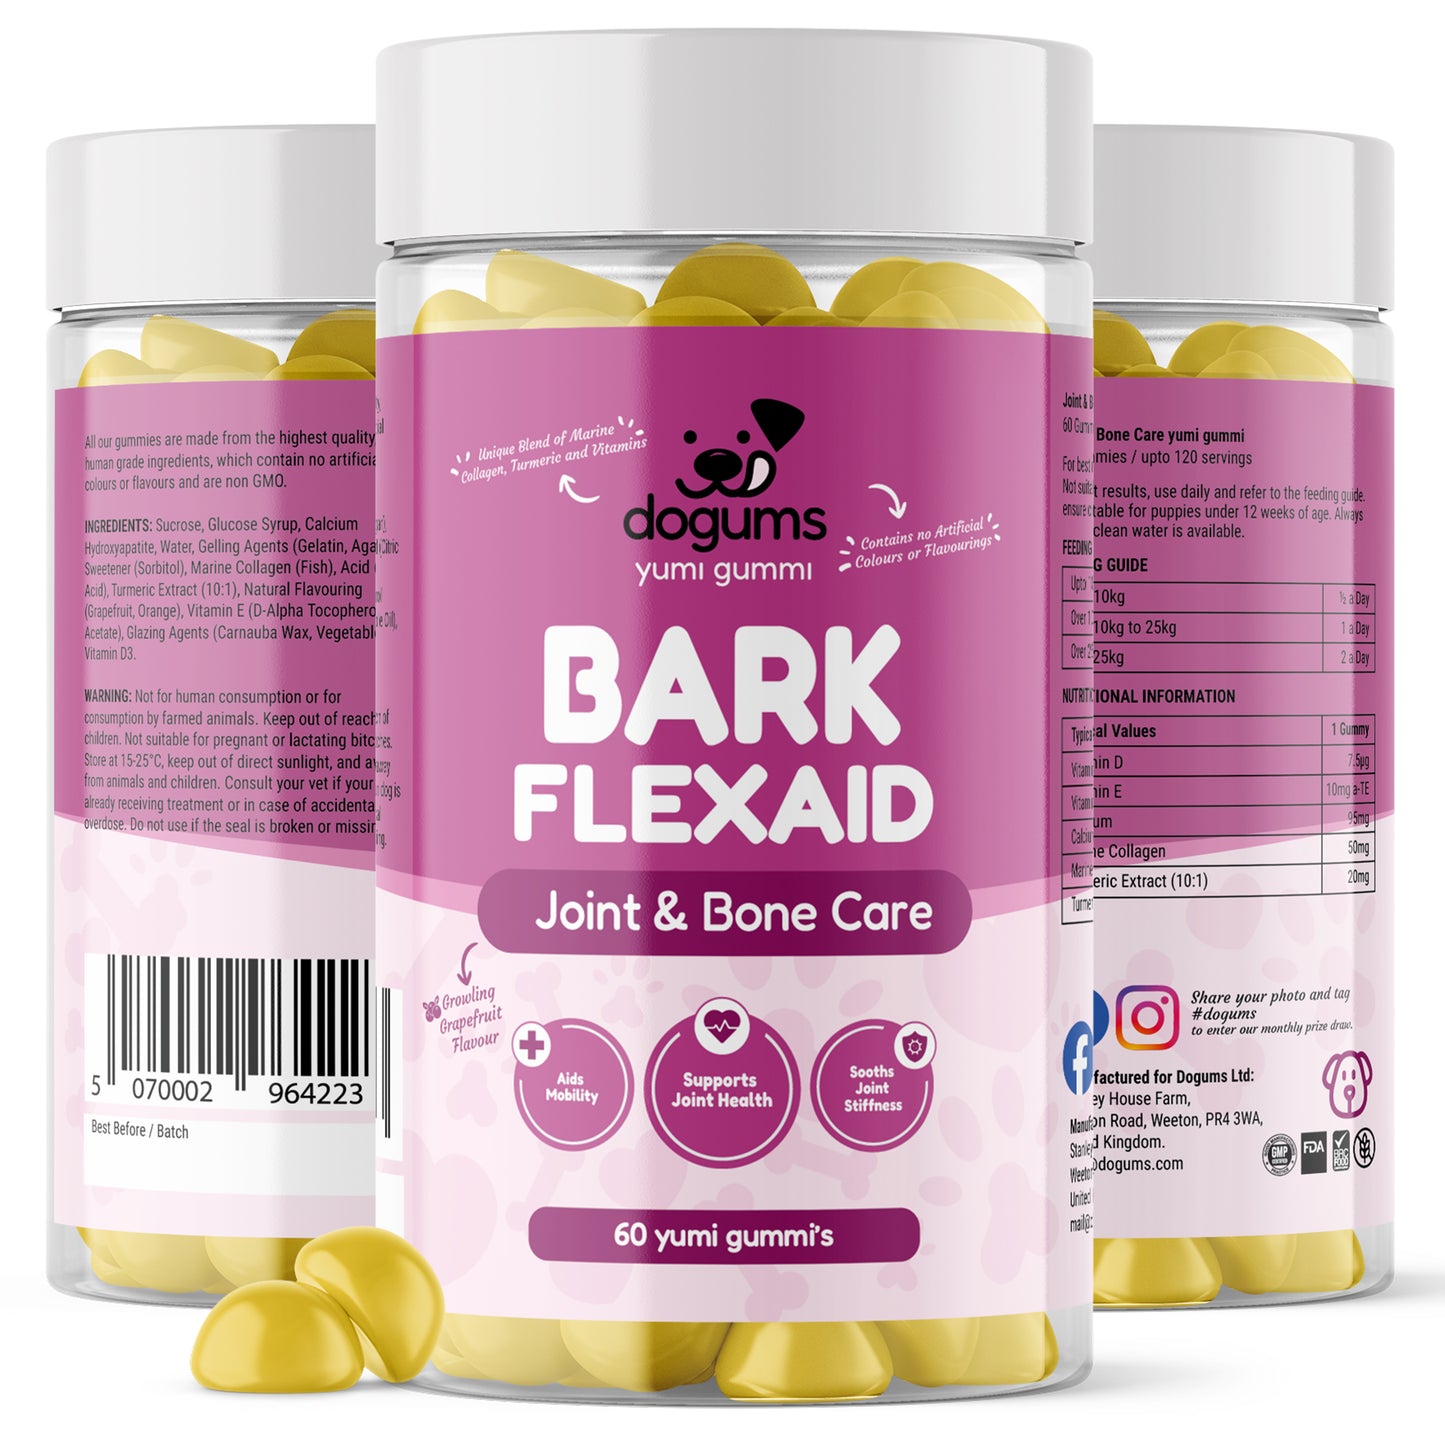 Joint & Bone Care